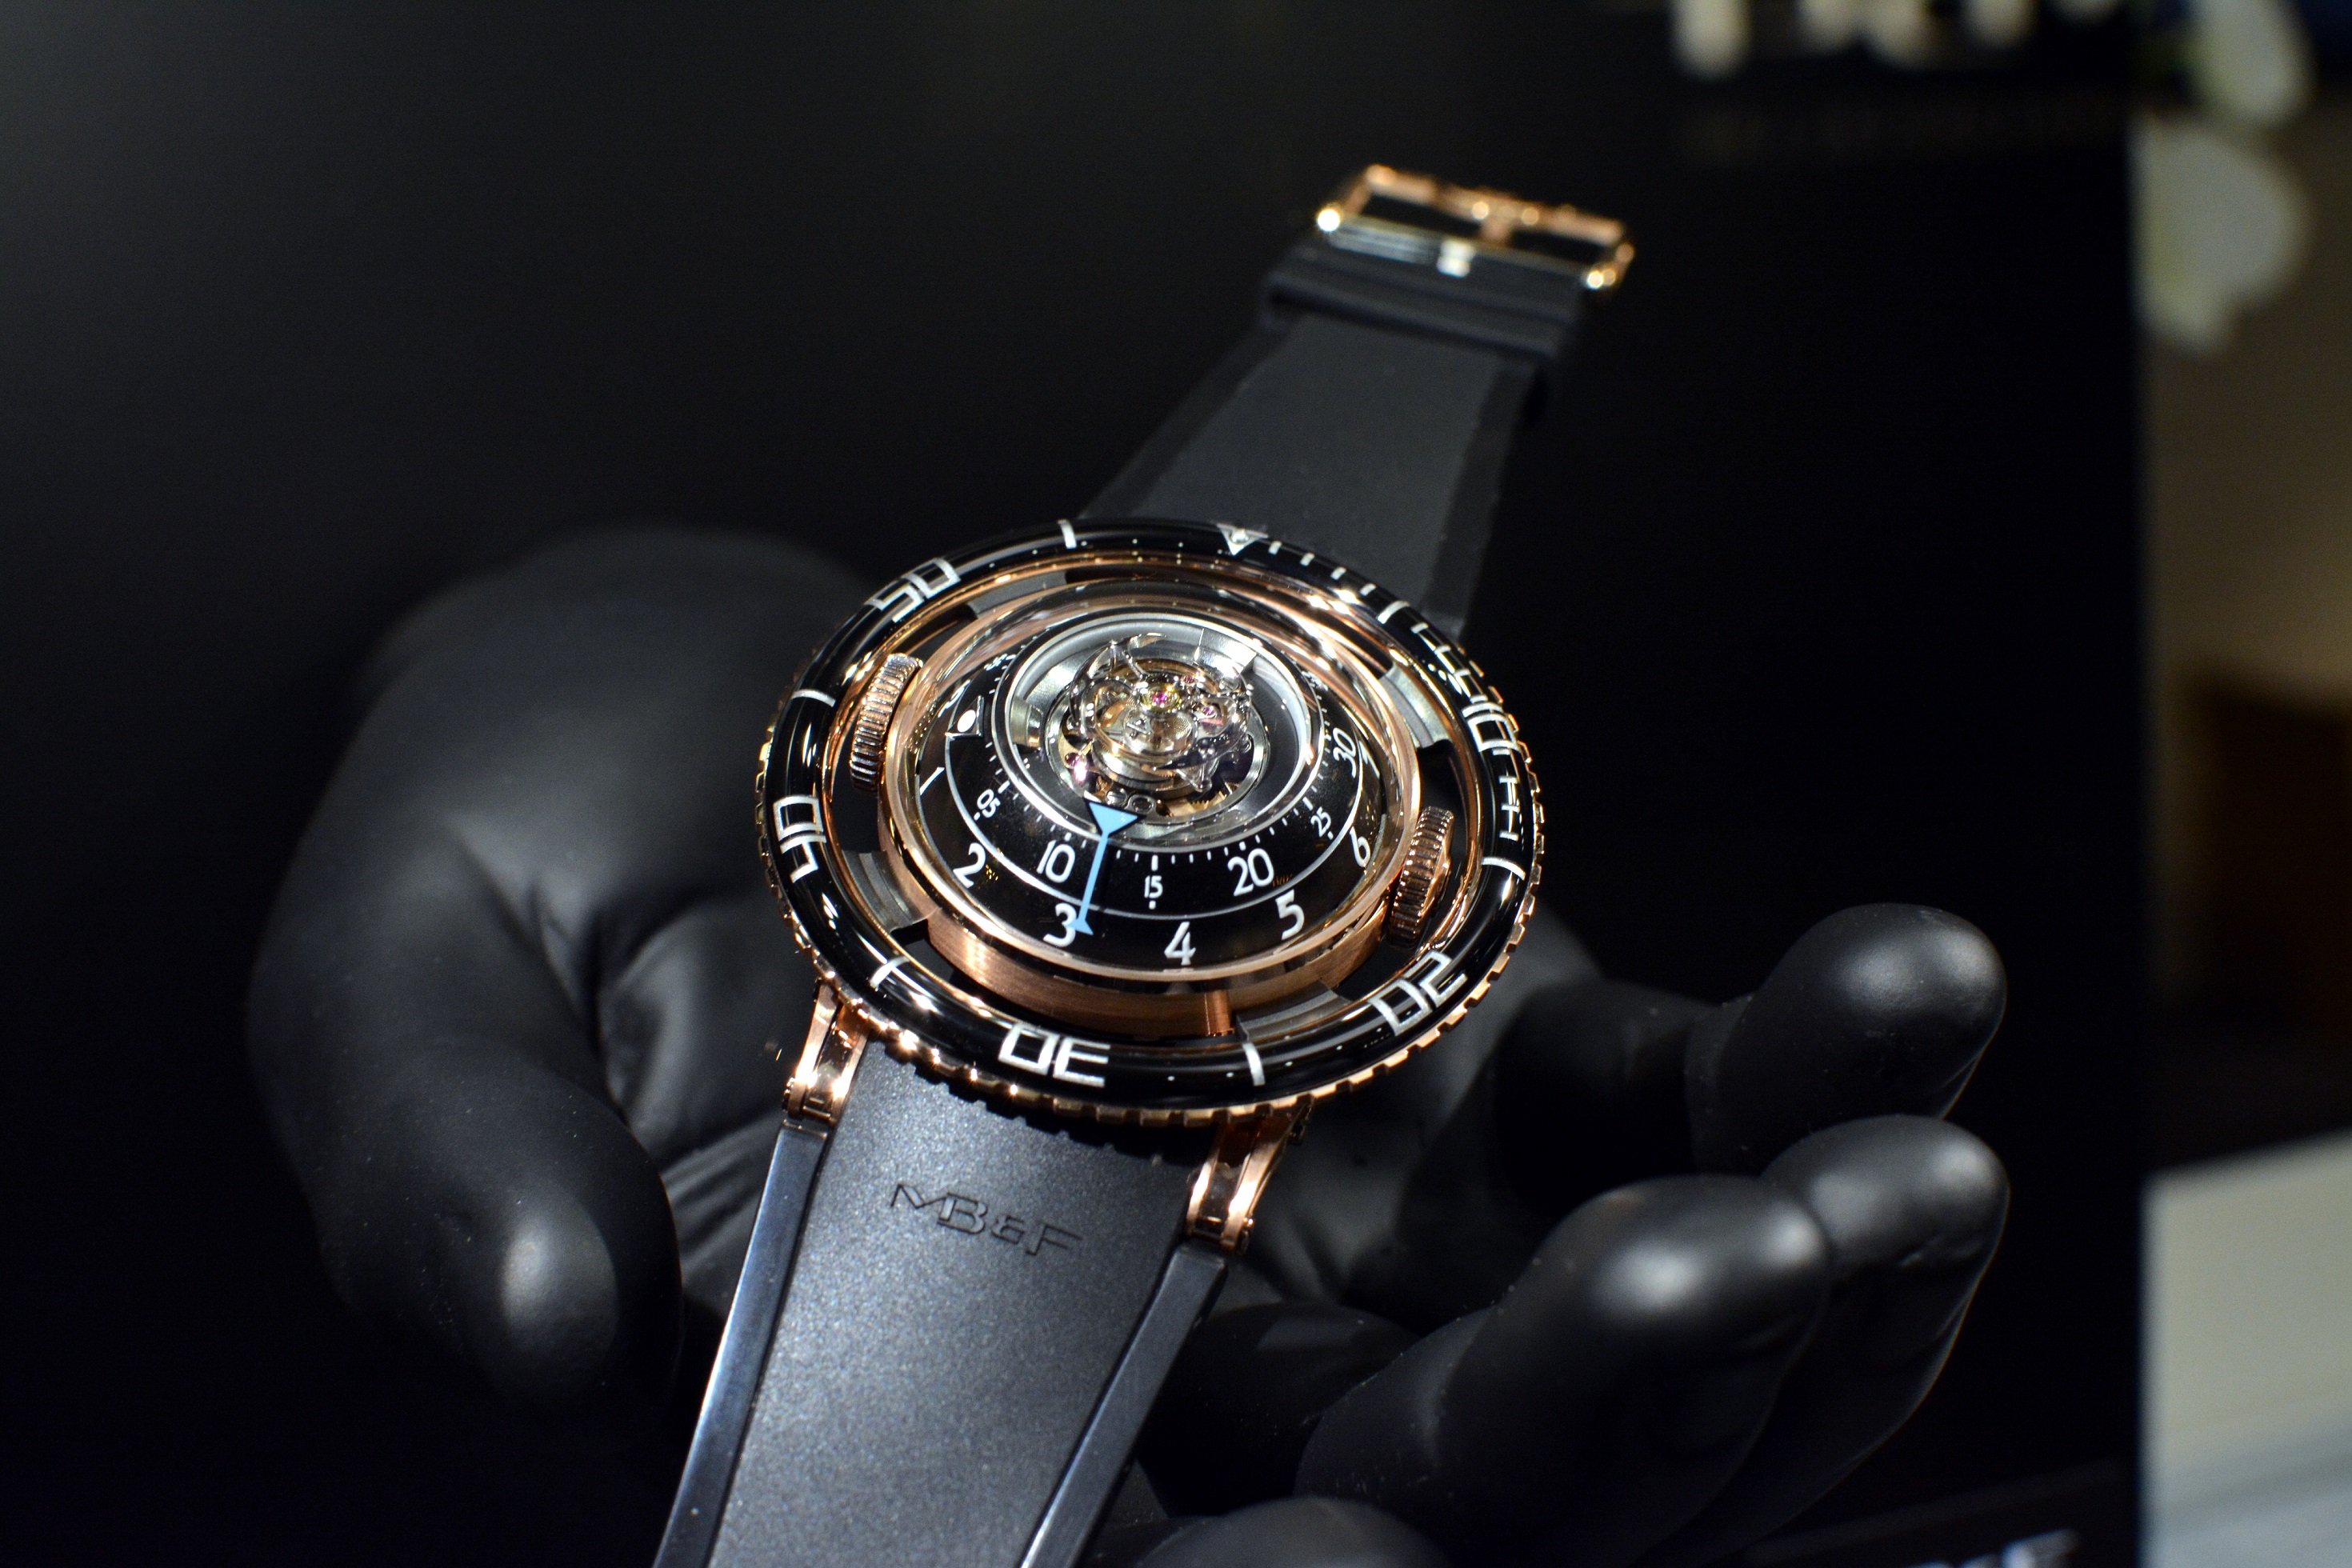 What inspires watch designs? The MB&F HM7 Aquapod was inspired by a jellyfish!